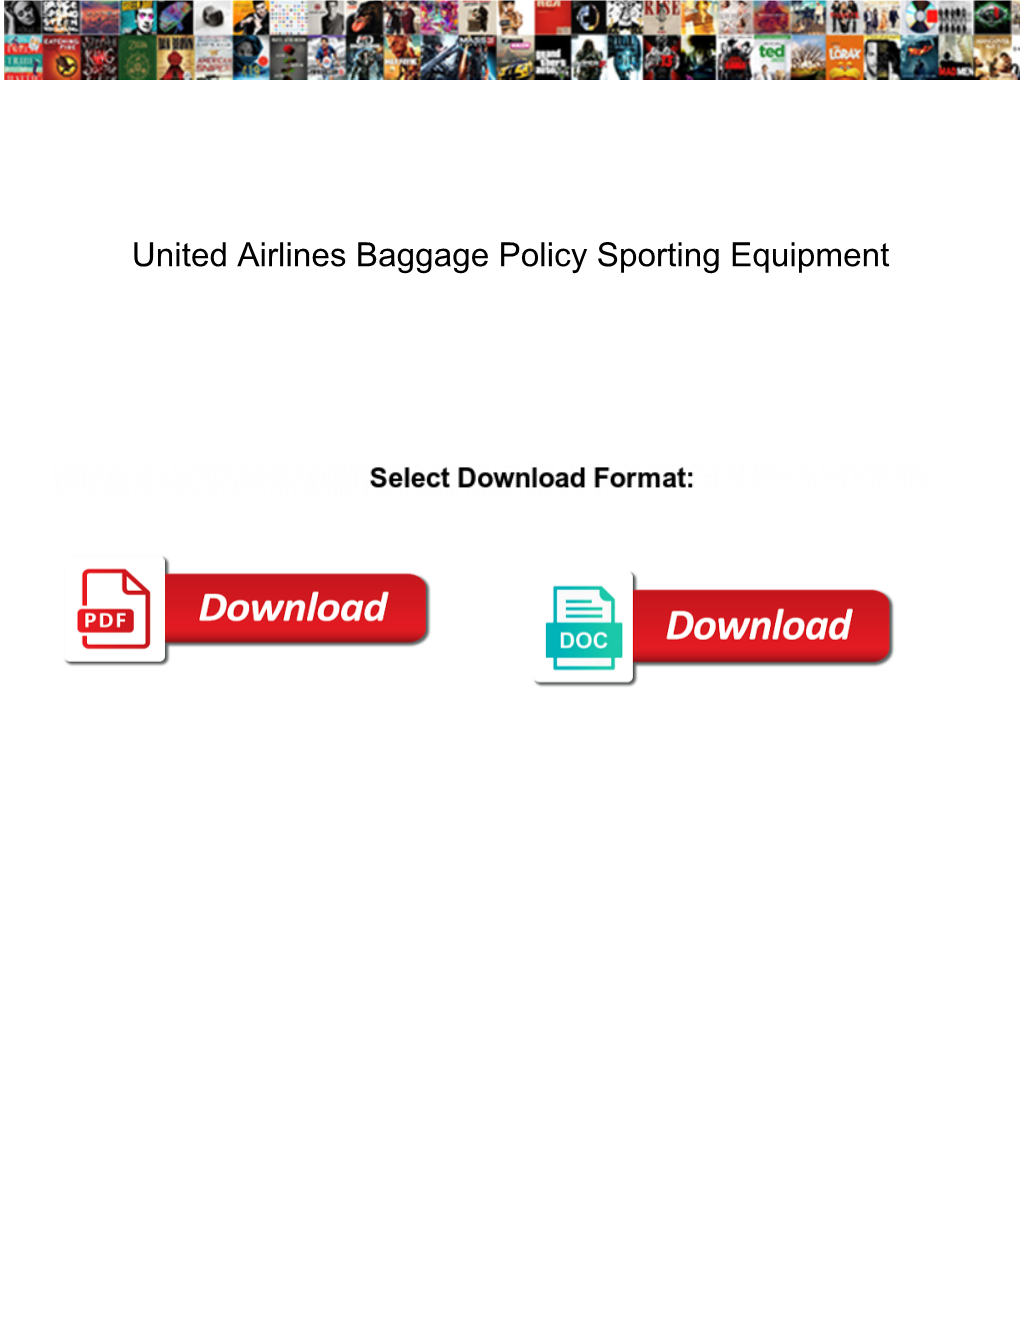 United Airlines Baggage Policy Sporting Equipment